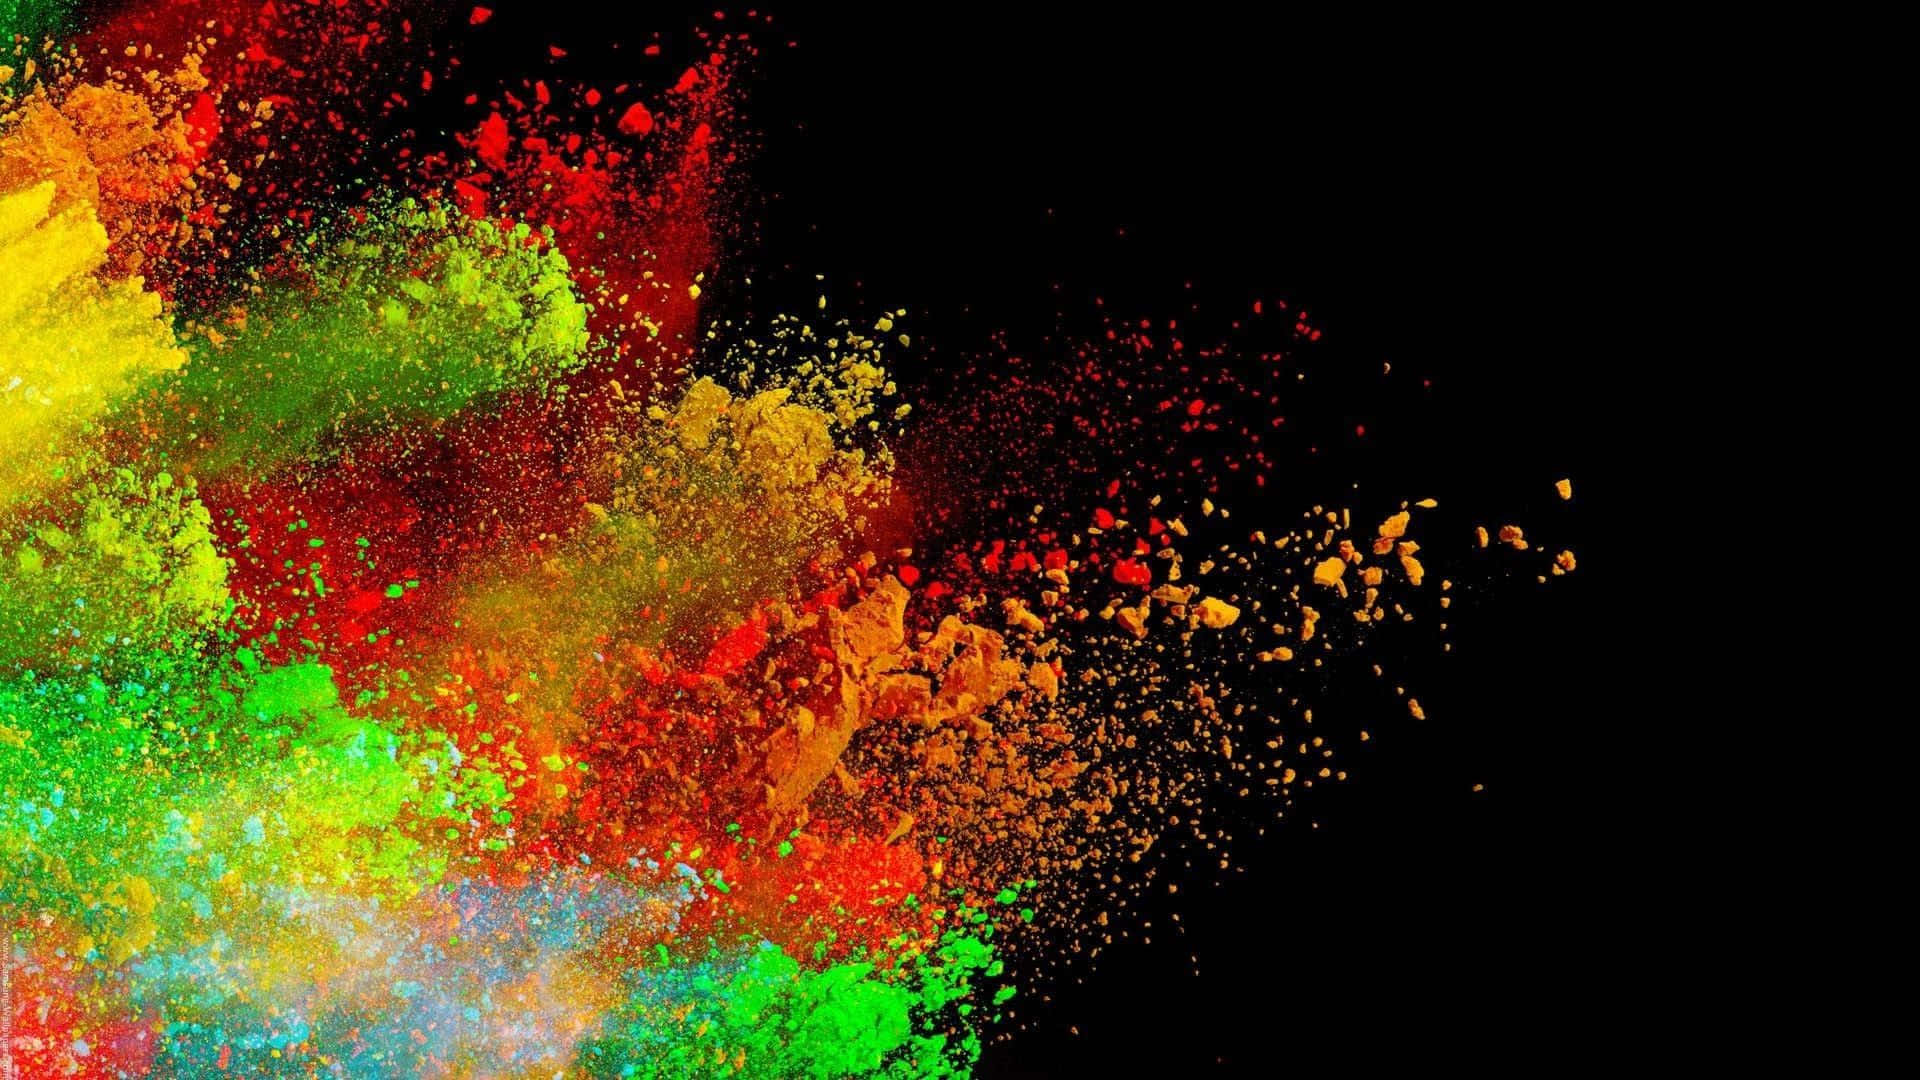 Download Colorful Powder Is Sprayed On A Black Background | Wallpapers.com